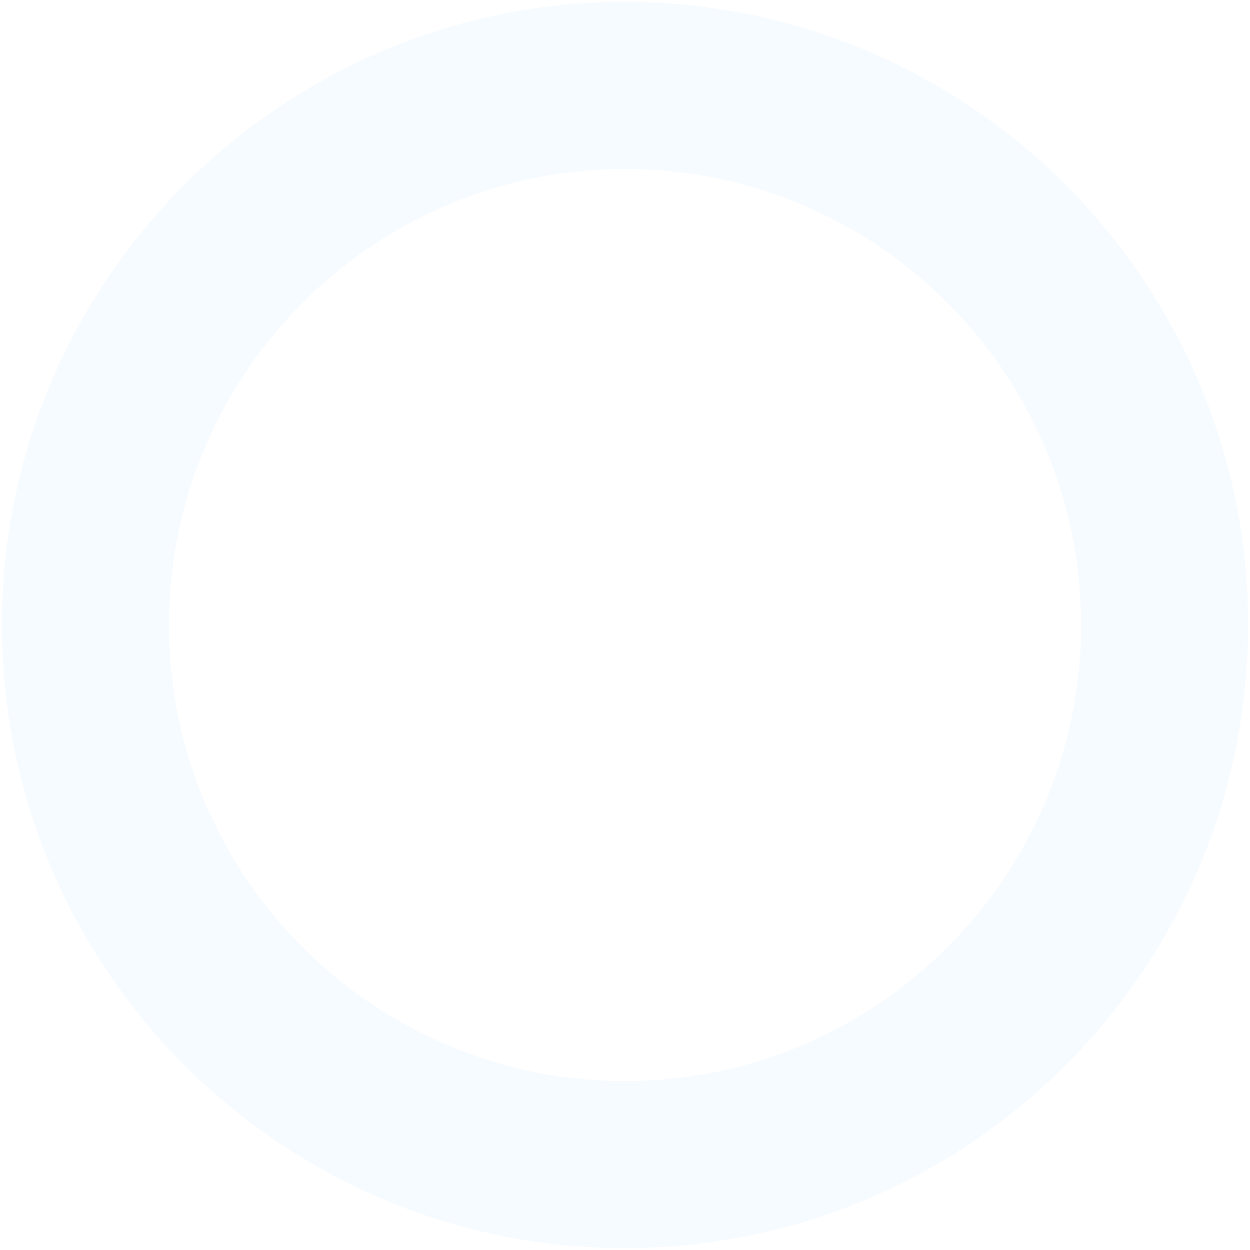 Join Our Mailing List - Empty White Circle Png (1250x1250)